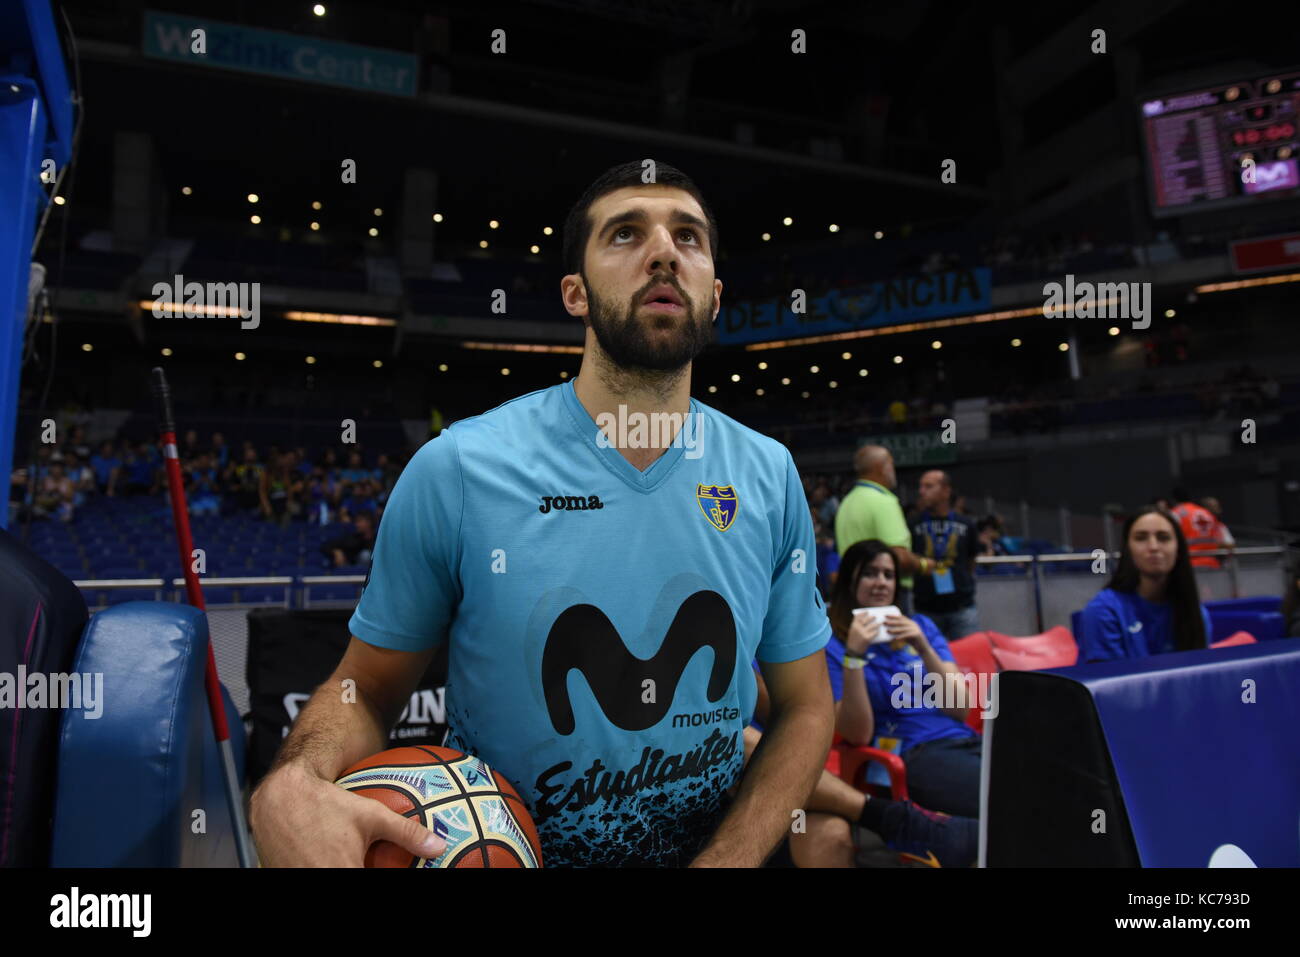 Madrid, Spain. 02nd Oct, 2017. Aleksandar Cvetkovic, #4 of Estudiantes pictured during the second game of Qualification Round for the basketball Champions league between Estudiantes and Donar Groningen. Credit: Jorge Sanz/Pacific Press/Alamy Live News Stock Photo